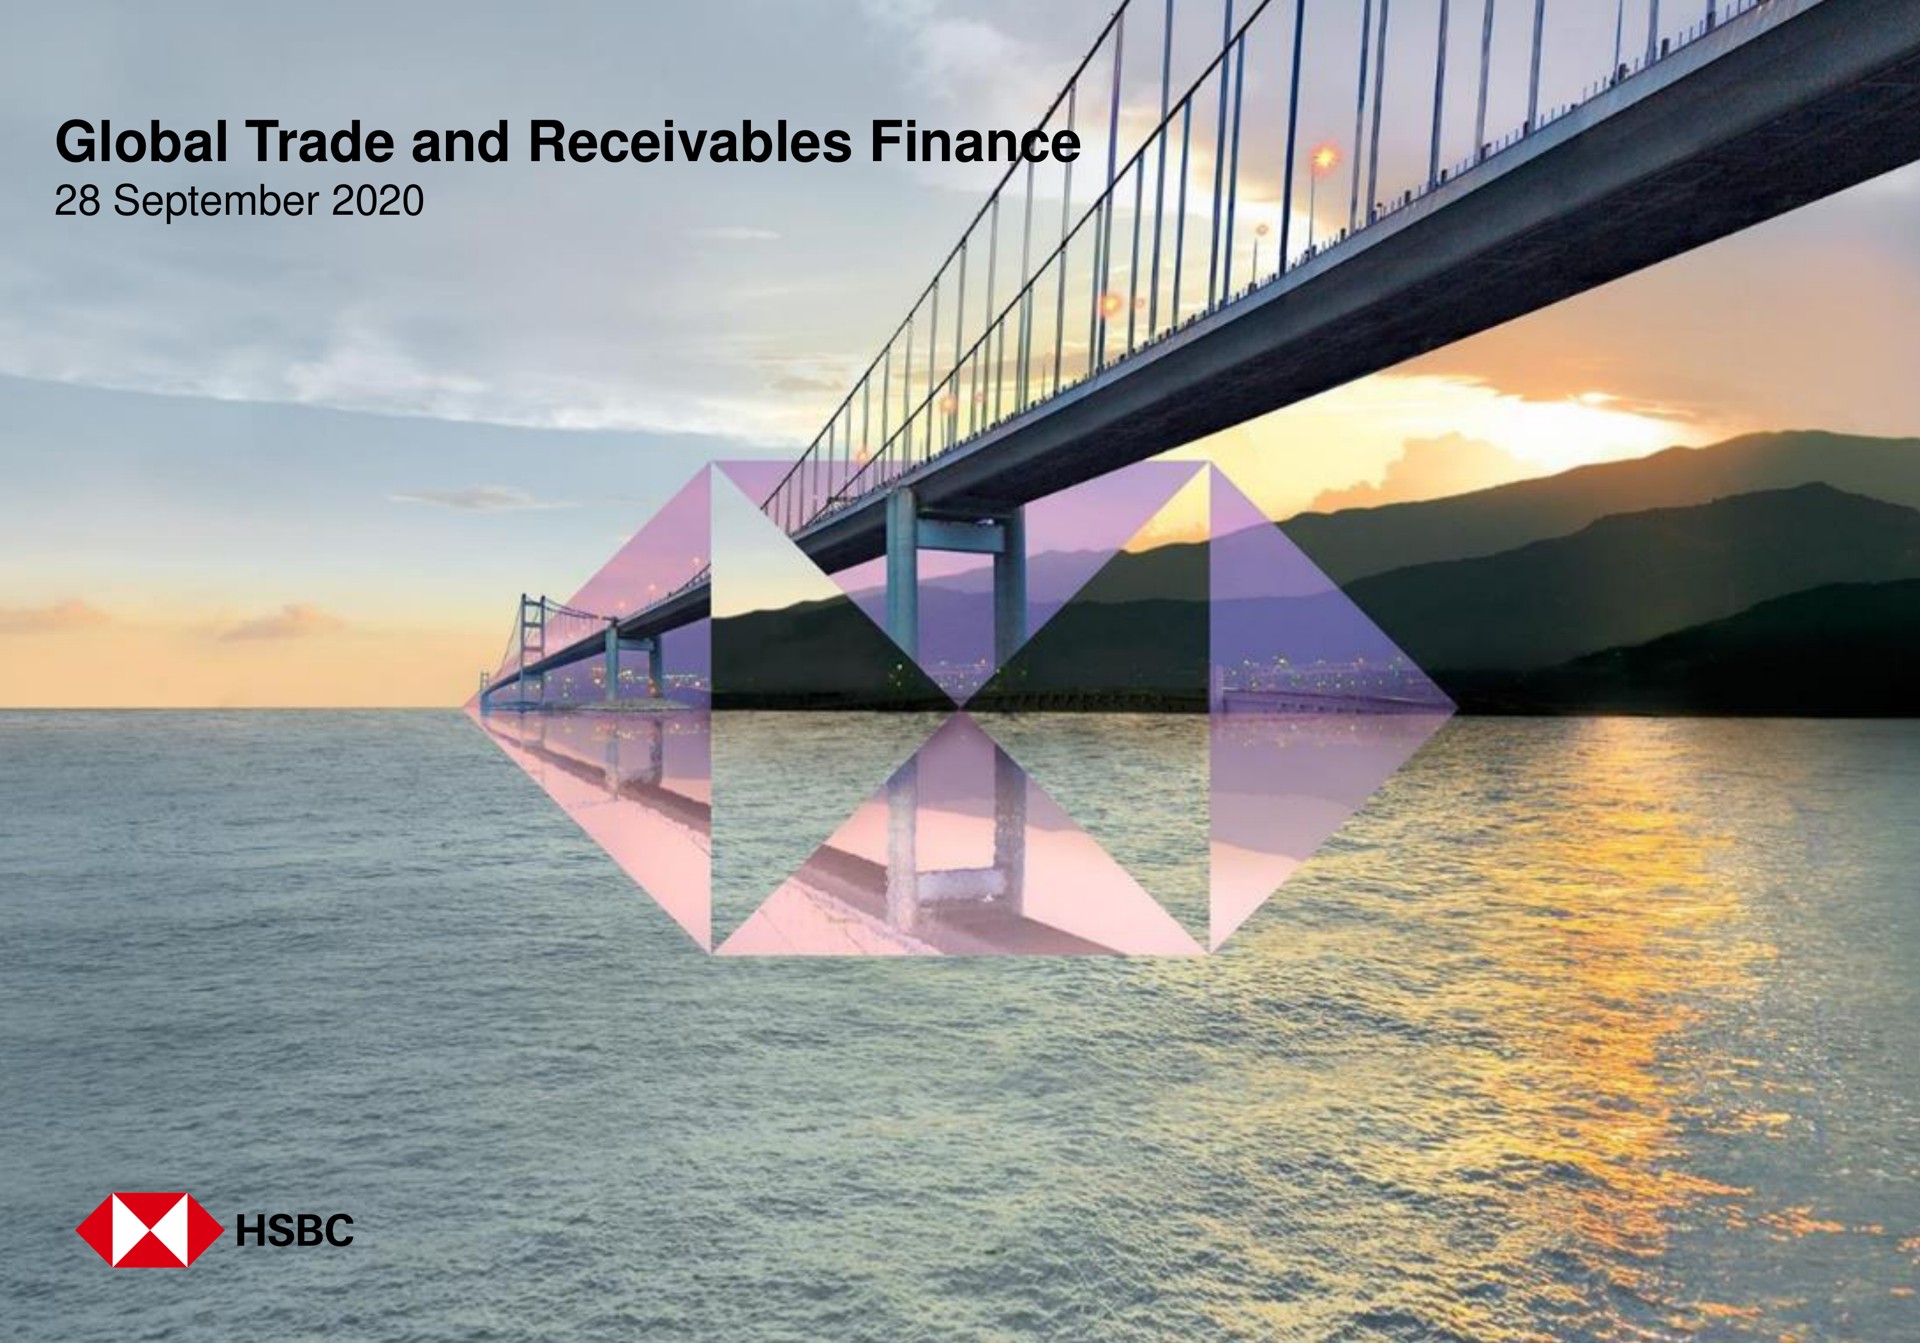 global trade and receivables finance | HSBC